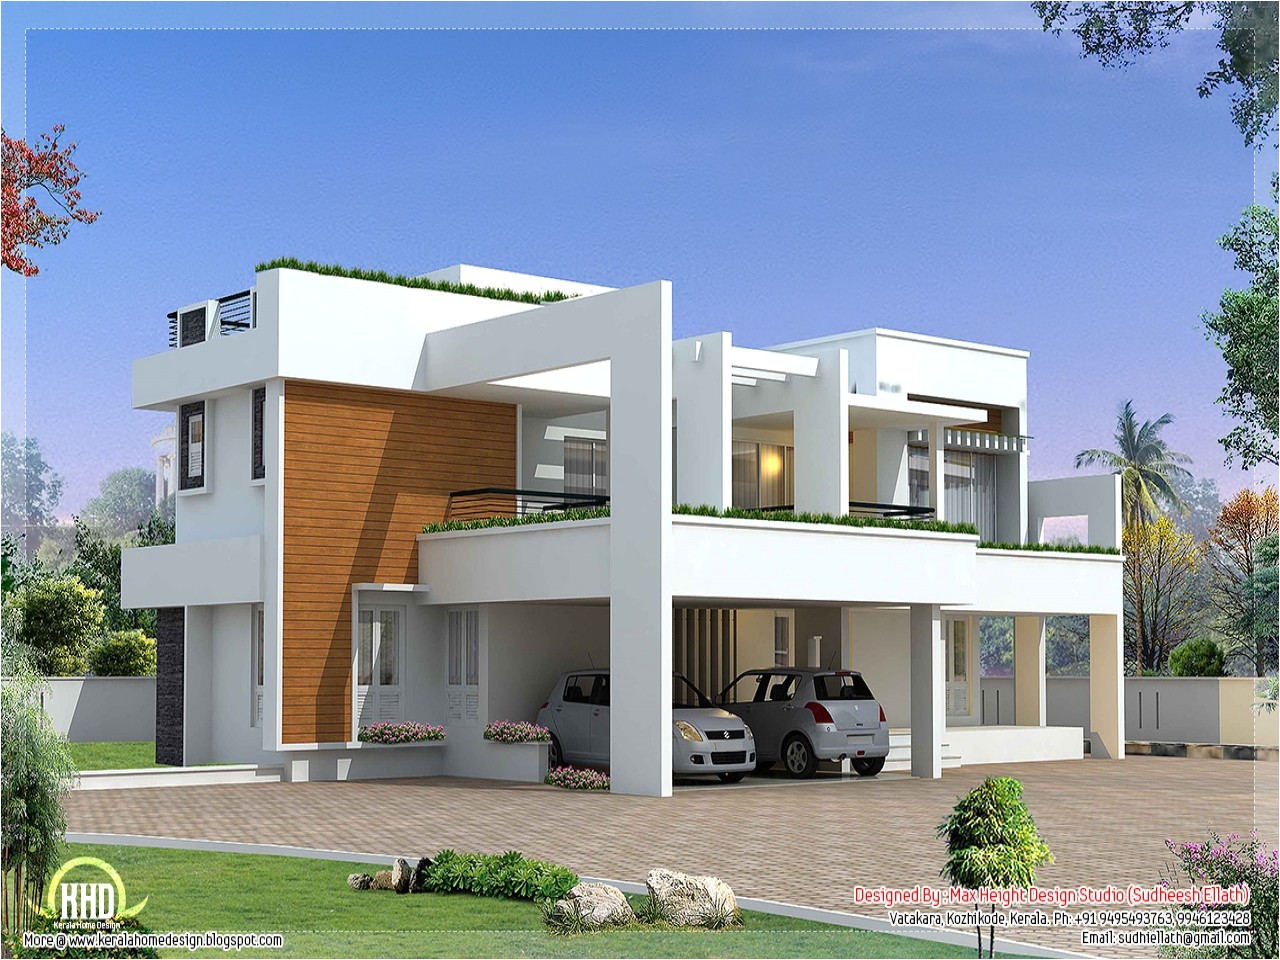 eee47461fa8c1421 modern contemporary house plans designs very modern house plans